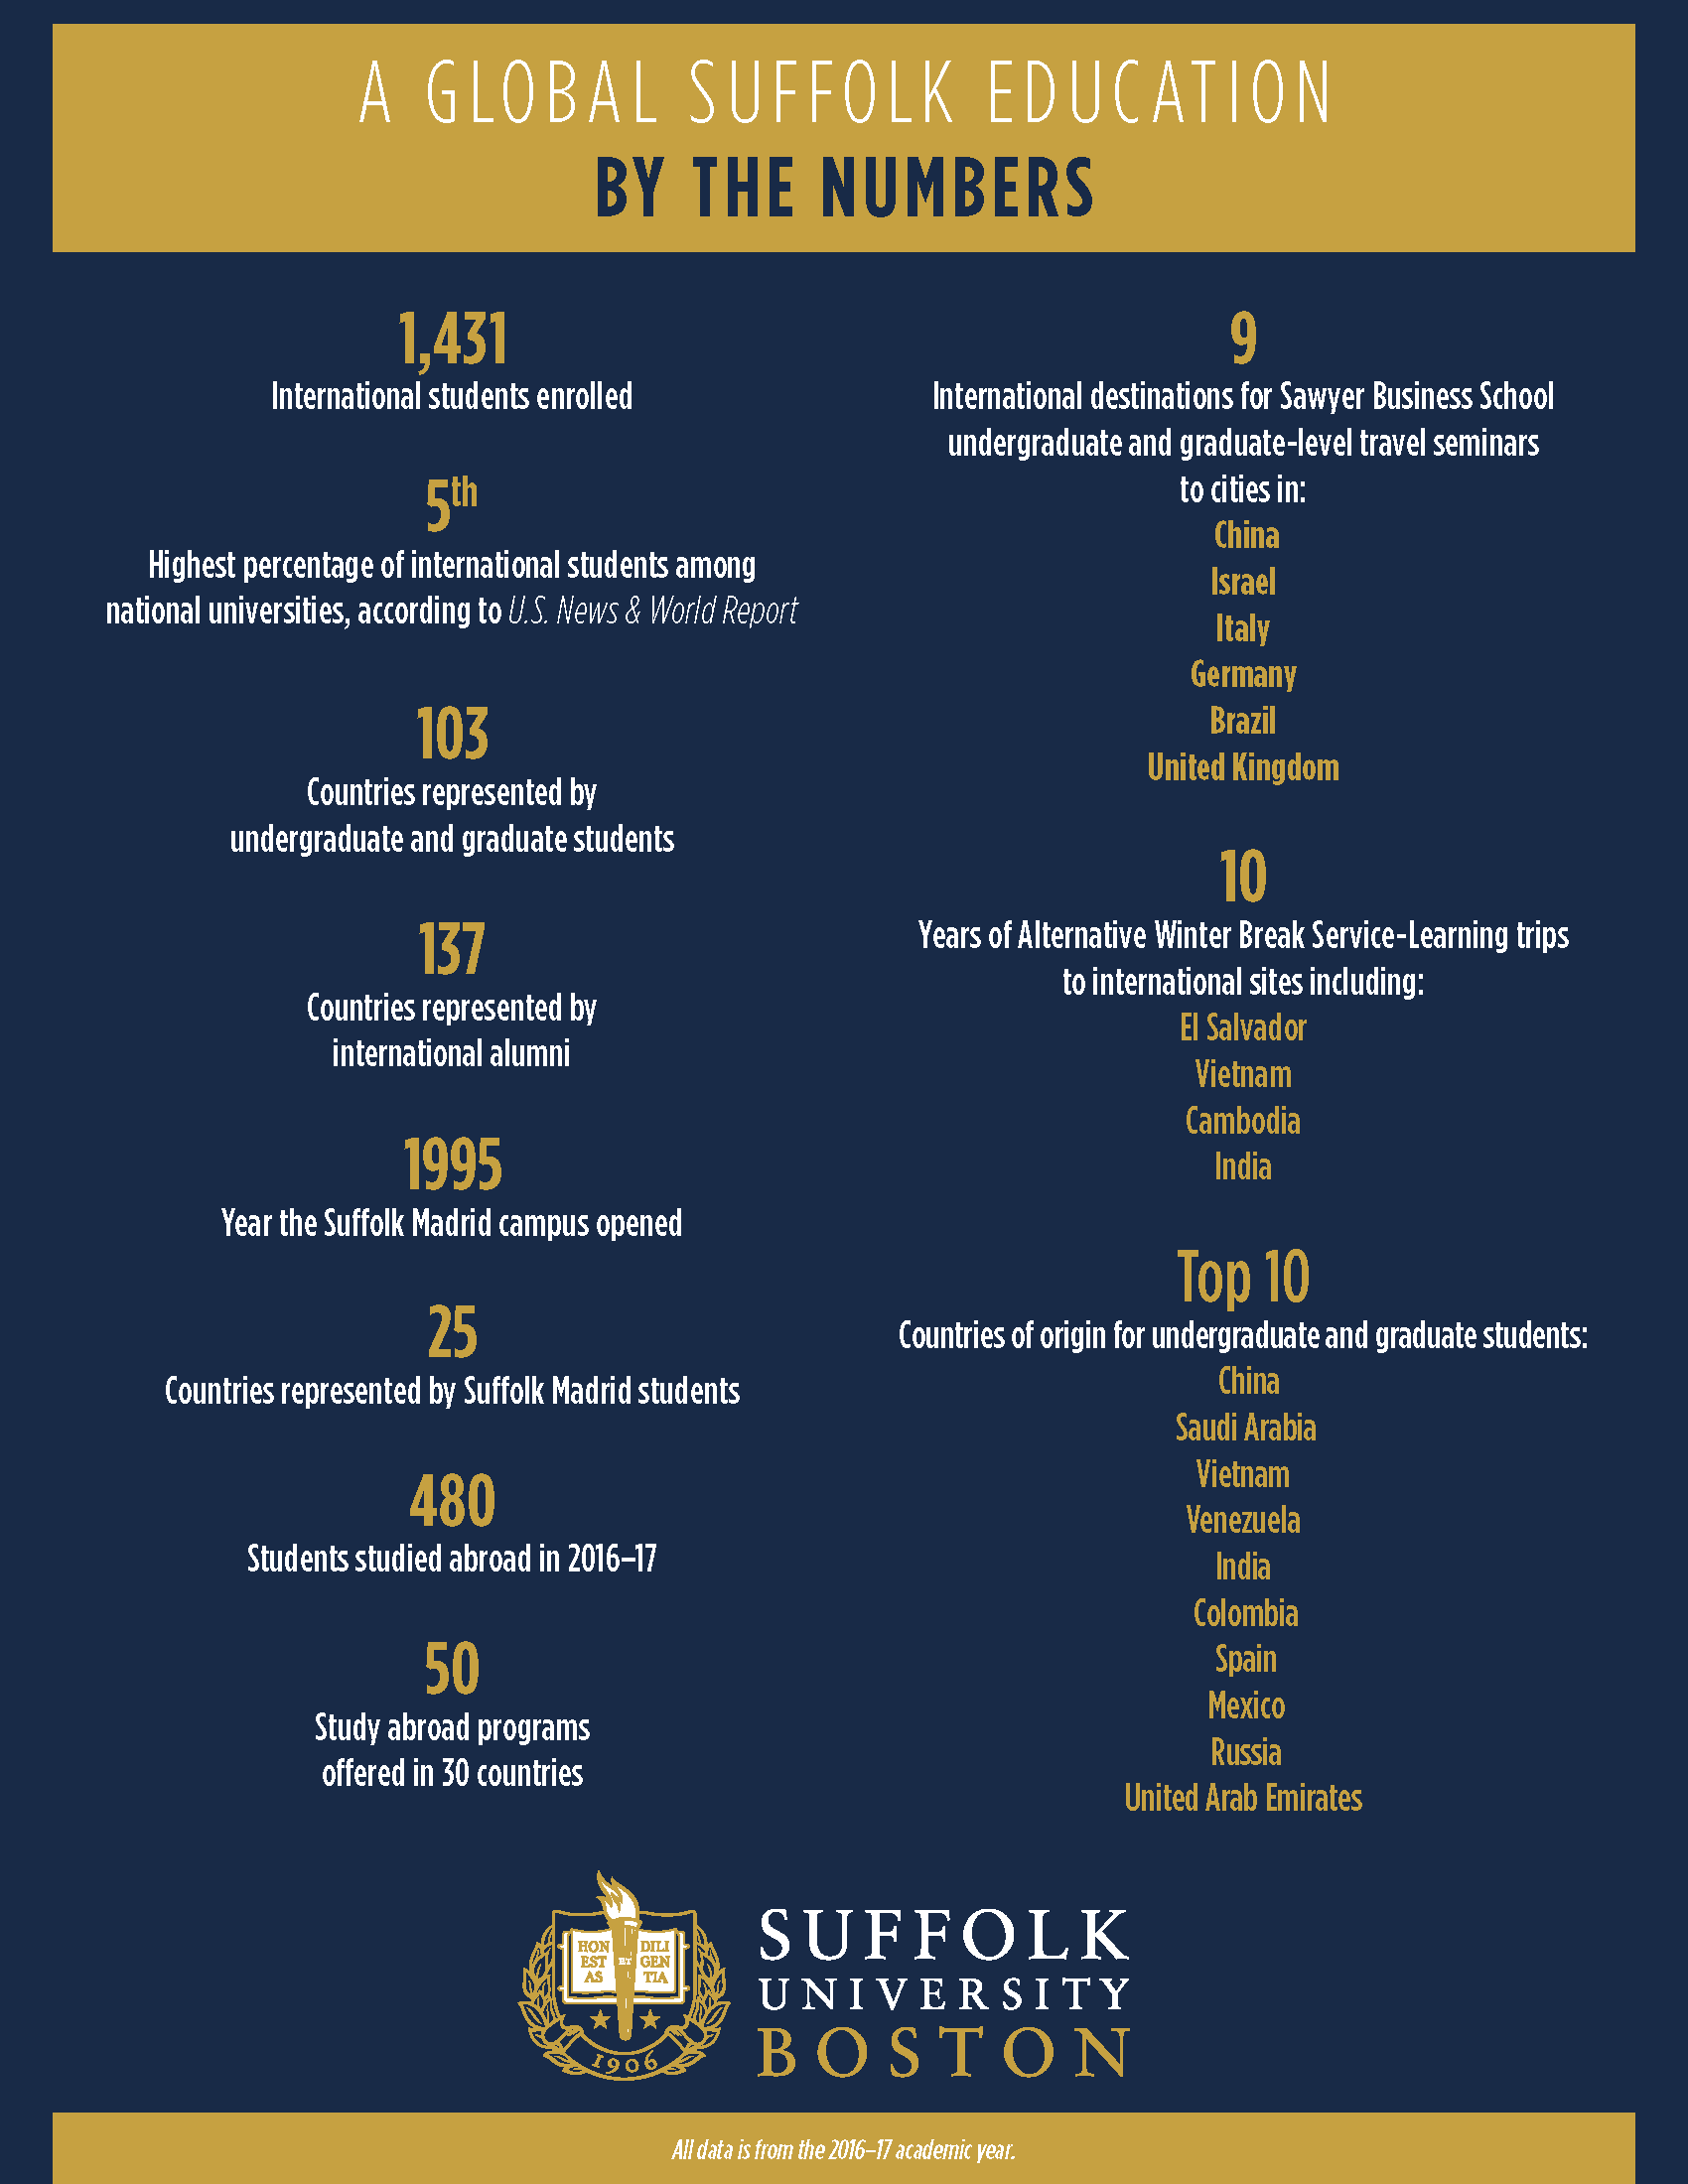 A Global Suffolk Education By the Numbers